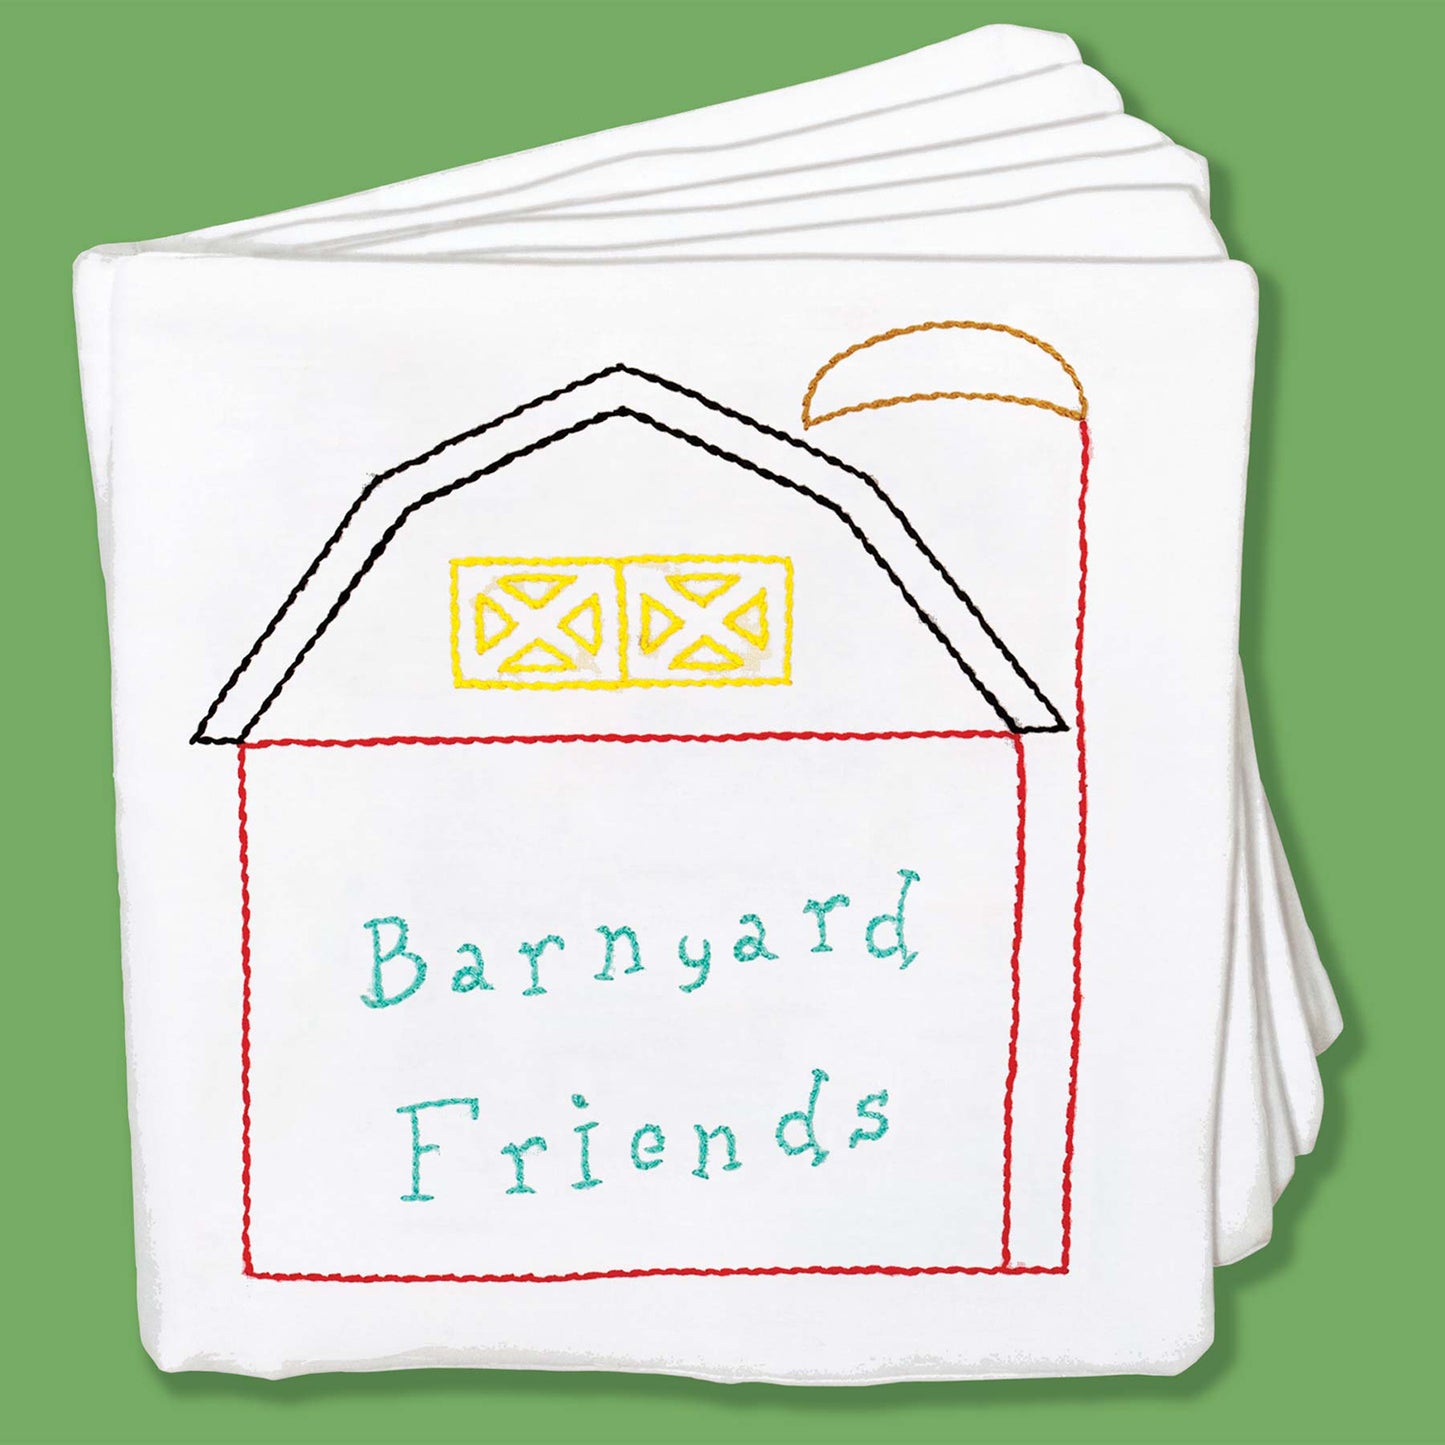 Barnyard Friends Cloth Embroidery Nursery Book Kit Primary Image